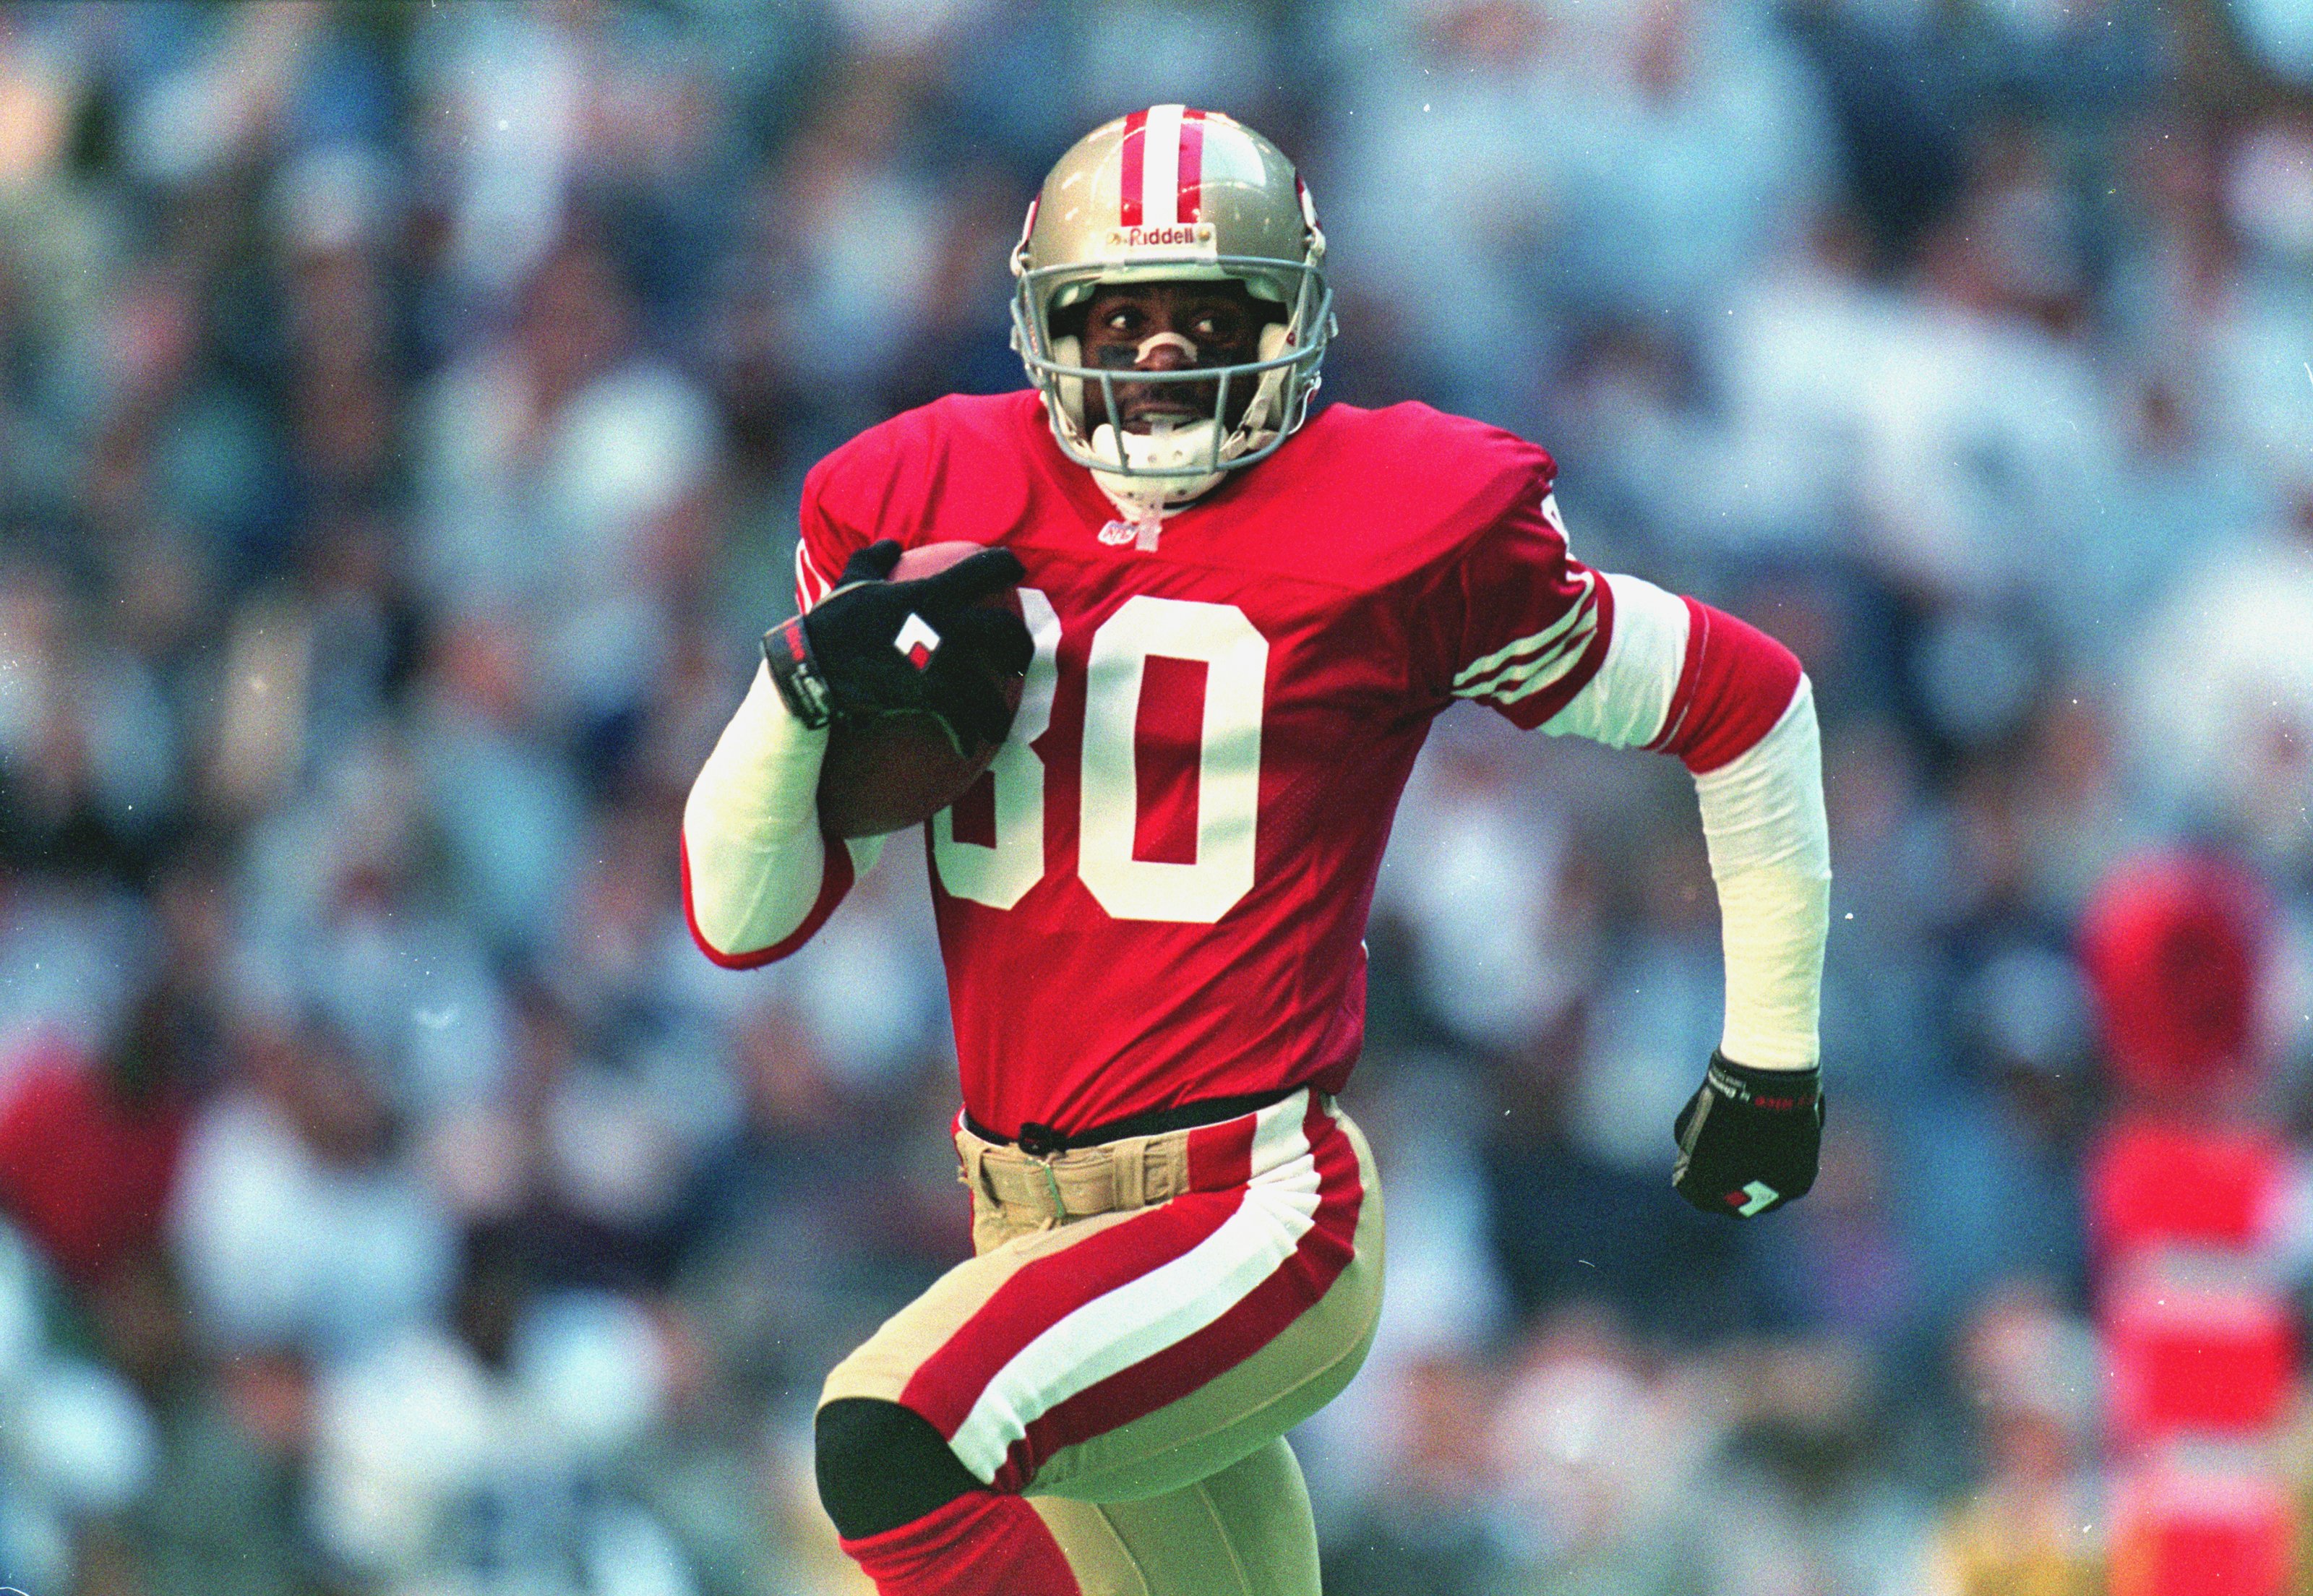 12 Nov 1995: Jerry Rice #80 of the San Francisco 49ers runs for a touch down during the game against the Dallas Cowboys at the Texas Stadium in Irving, Texas. The 49ers defeated the Cowboys 38-20.